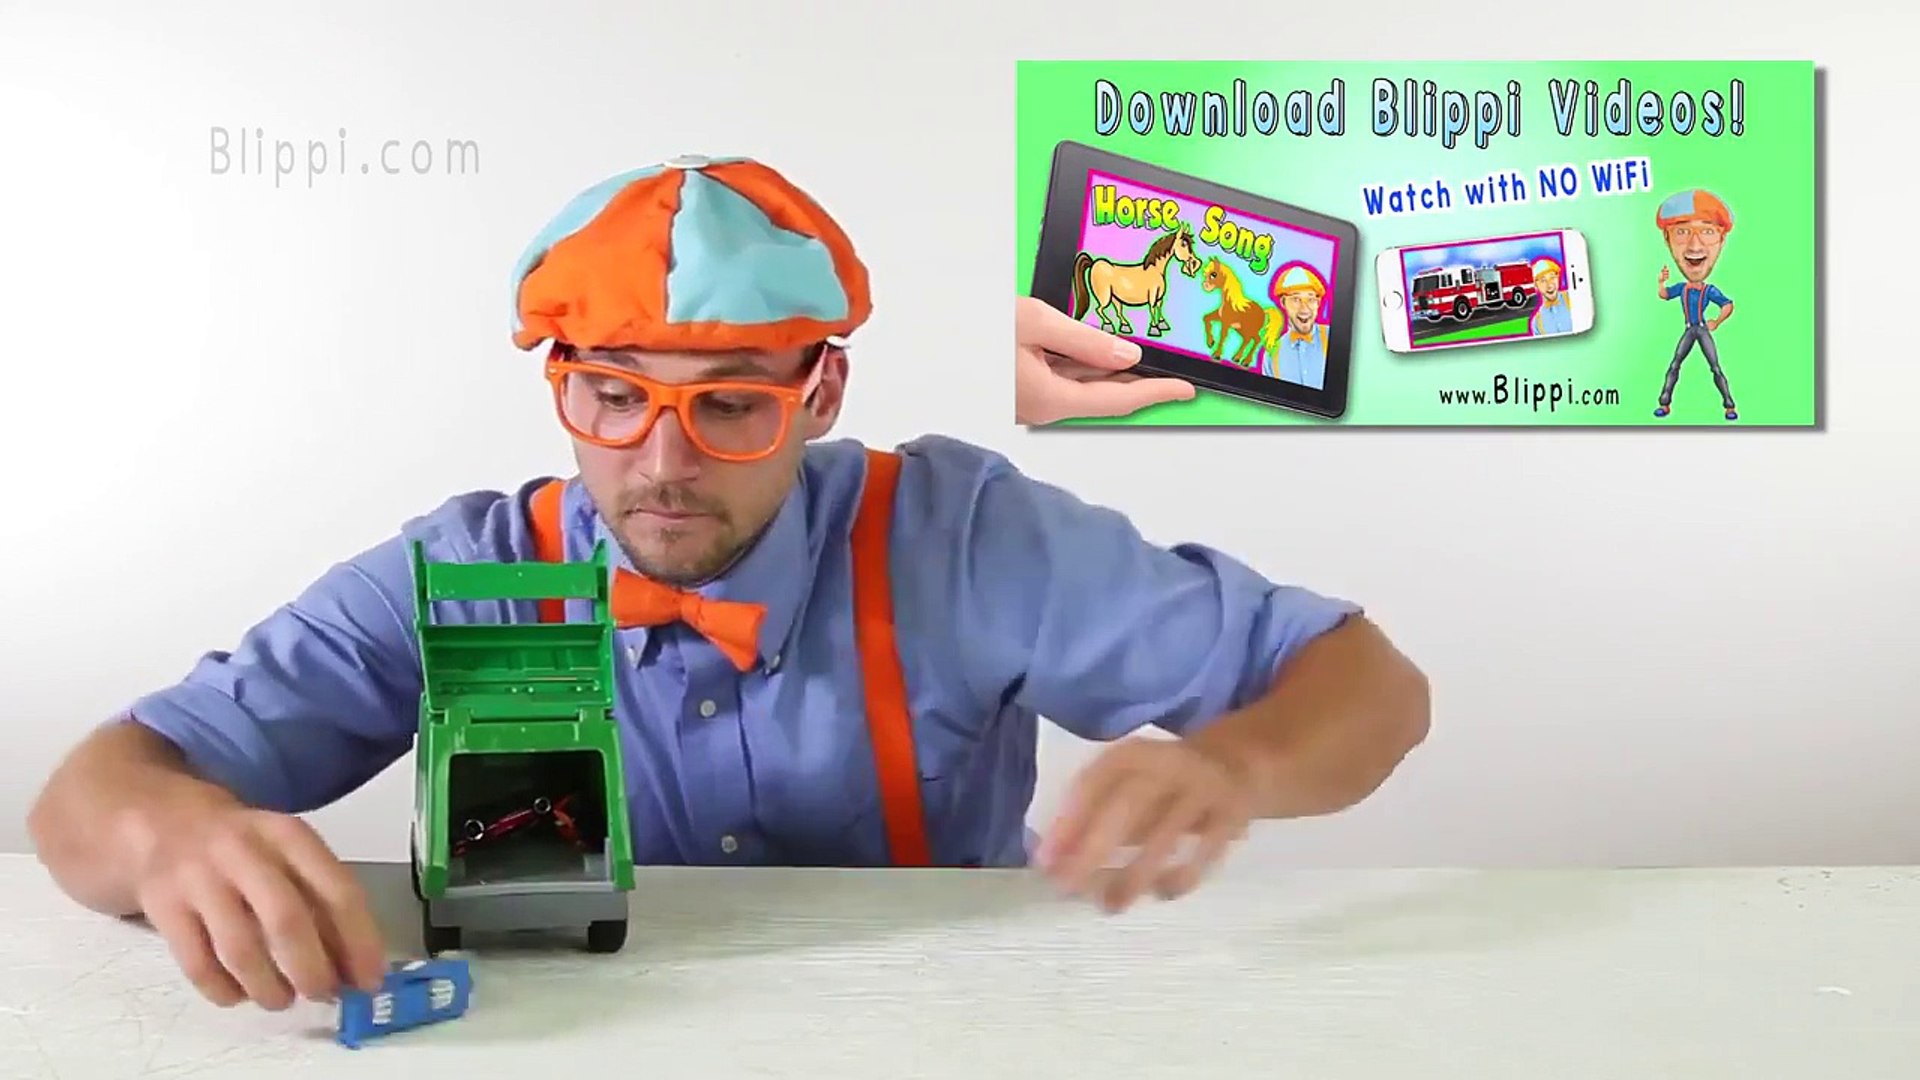 Garbage Trucks For Kids Recycling And Dumping Trash With Blippi Toys Learn Colors Blippi Toys Video Dailymotion This is the garbage truck song by blippi. garbage trucks for kids recycling and dumping trash with blippi toys learn colors blippi toys